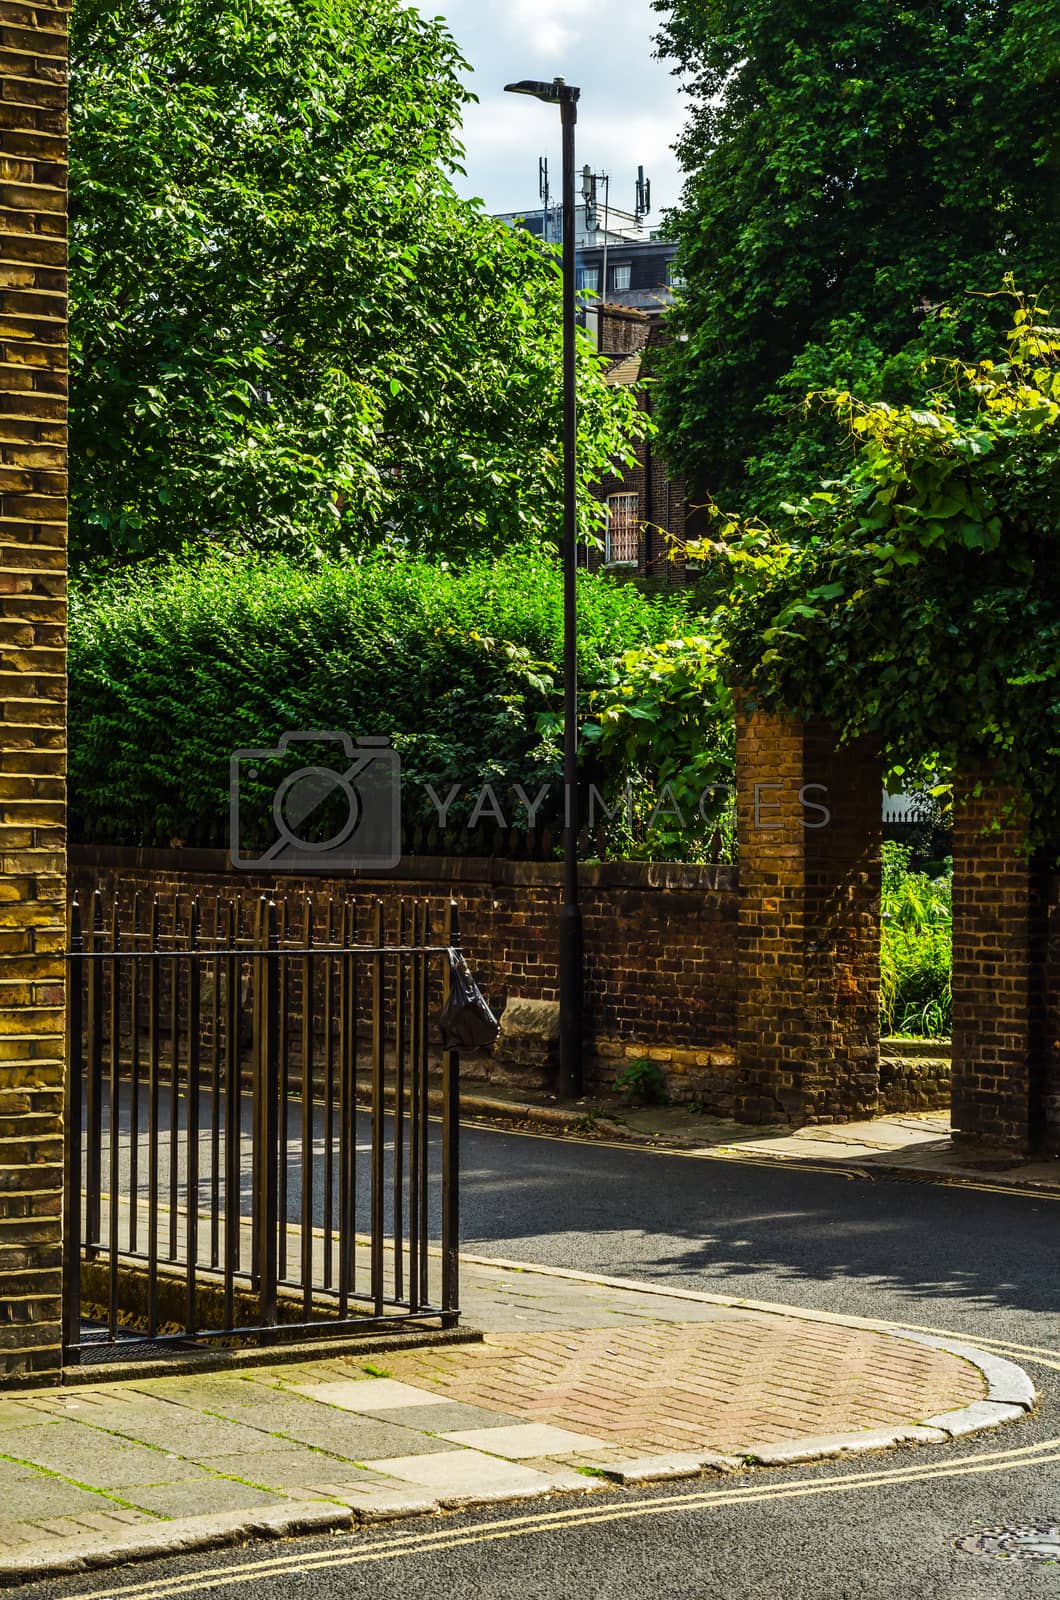 Royalty free image of Typical old English buildings, low brick buildings across a narr by Q77photo